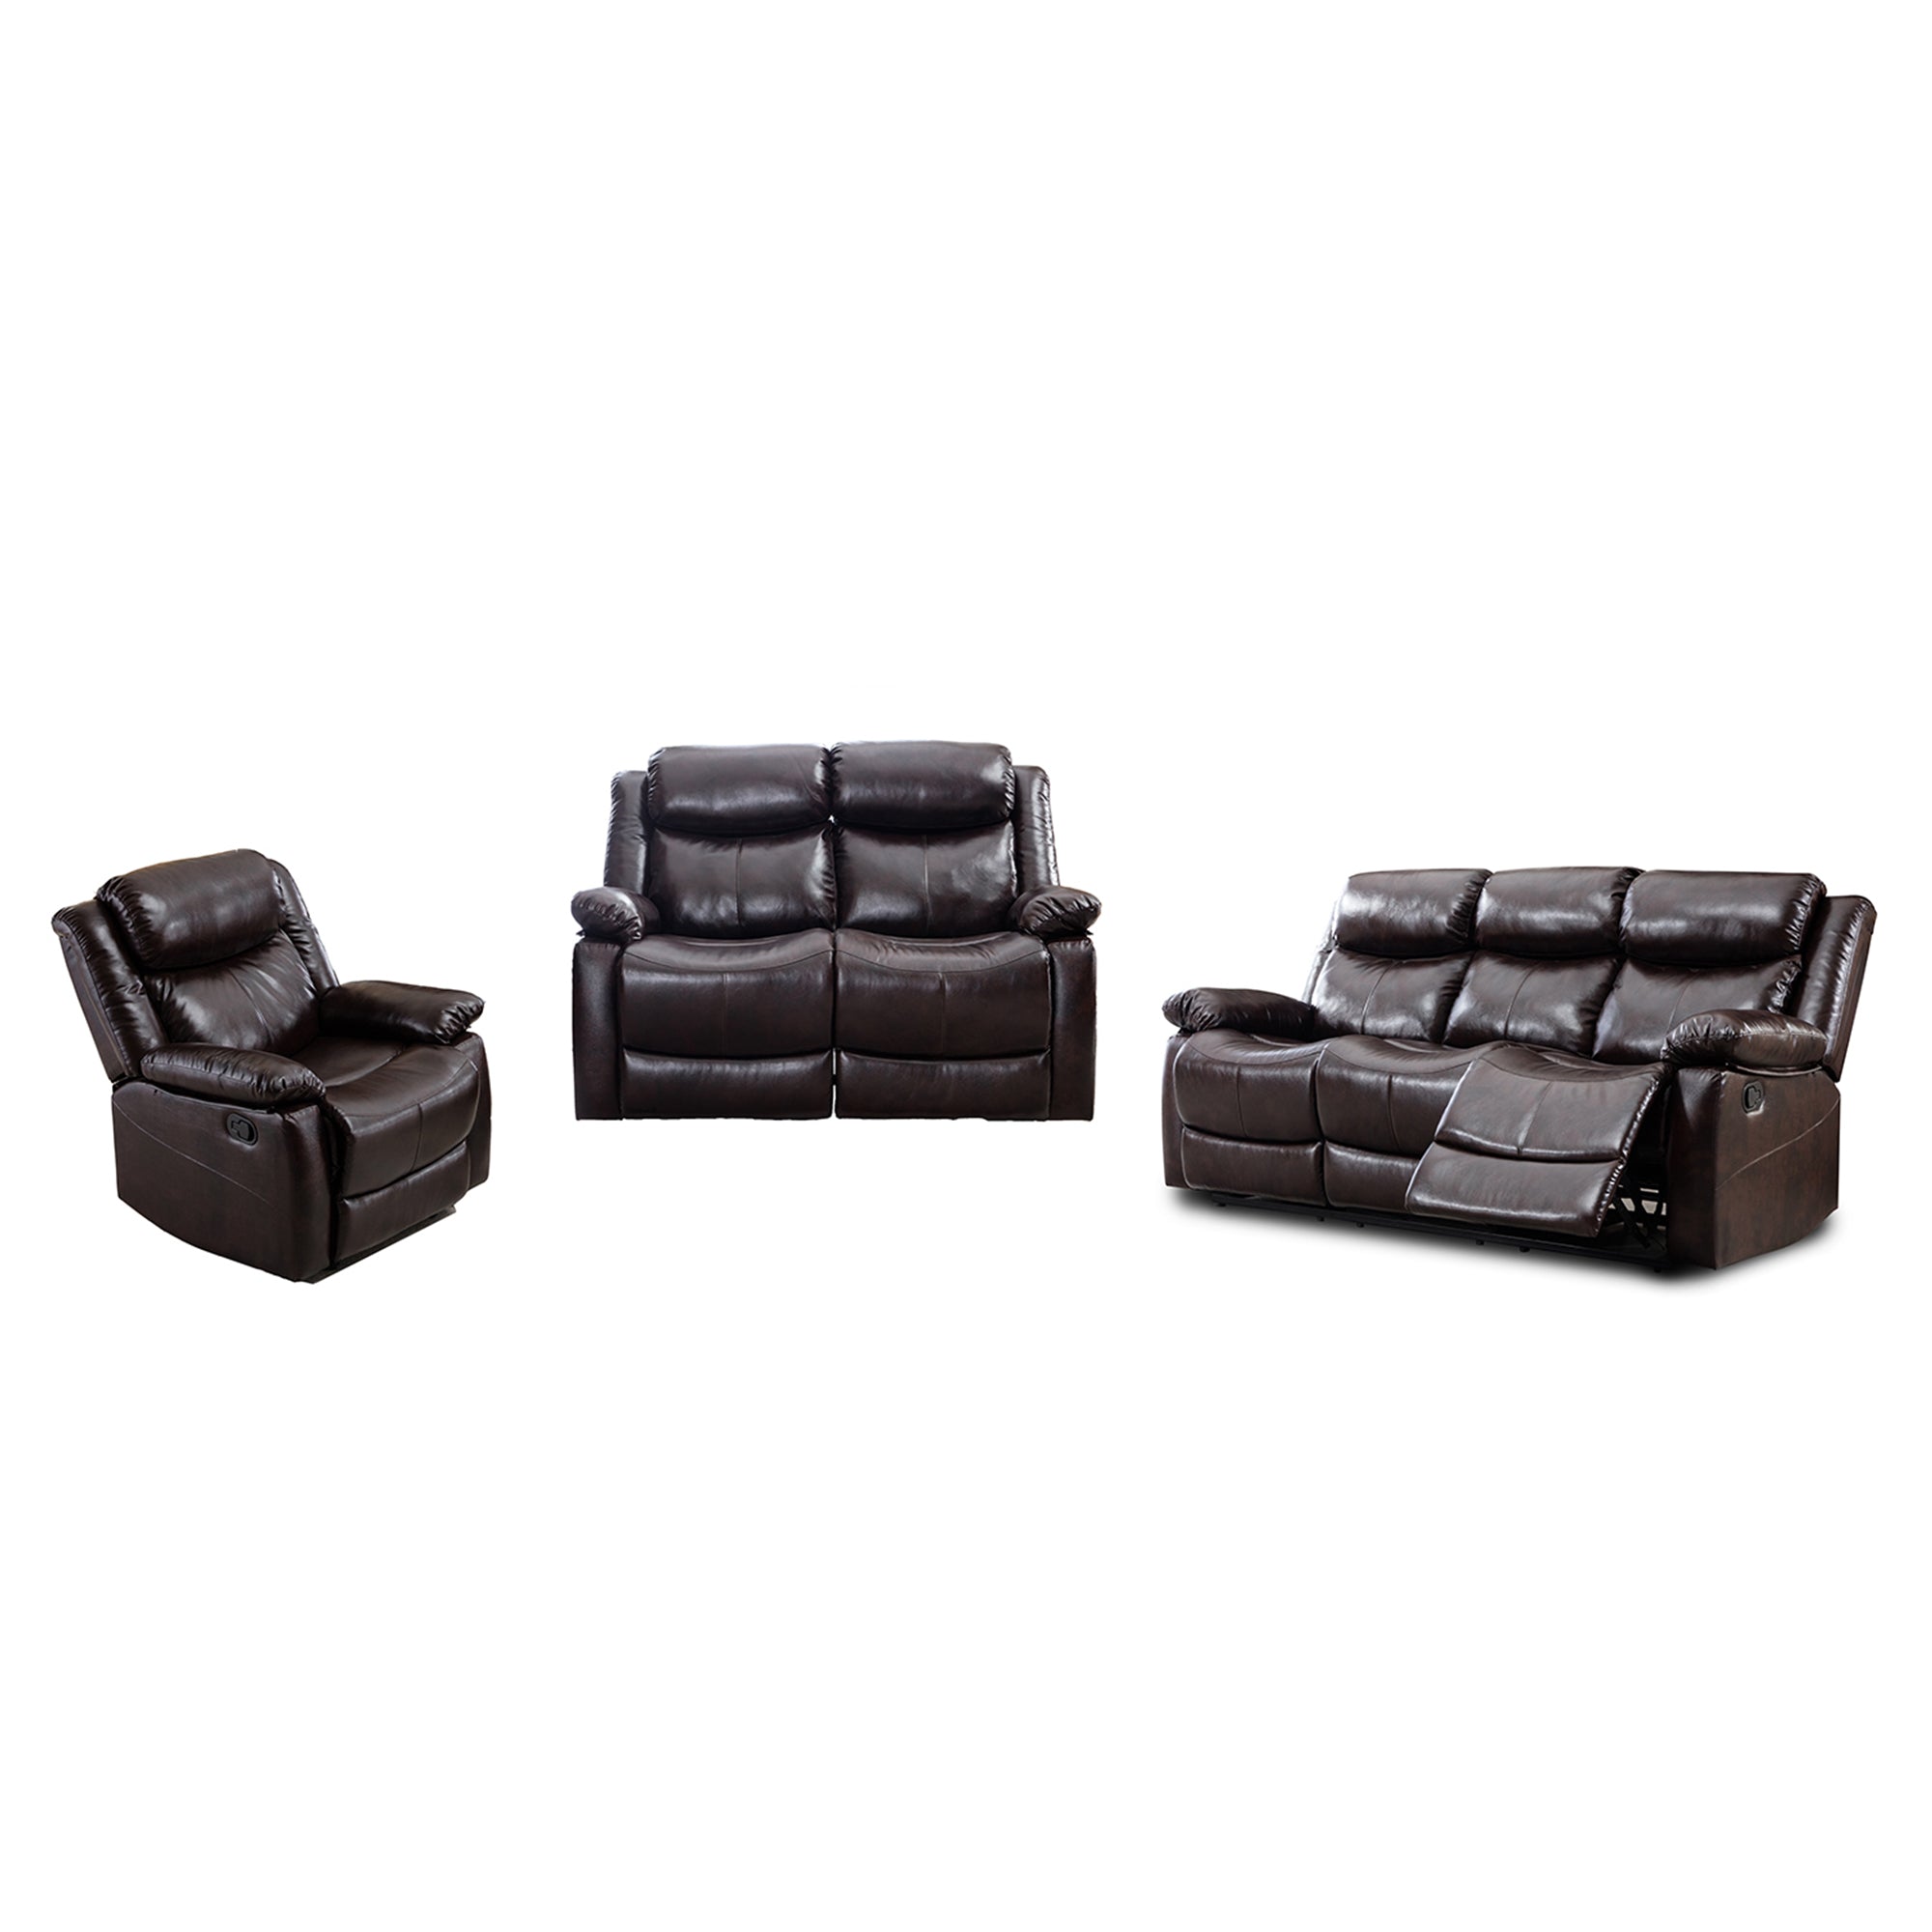 PU Leather Reclining Sofa Set- Classic Sectional Couch Furniture Lounge Chair, Loveseat and Three Seat-Boyel Living